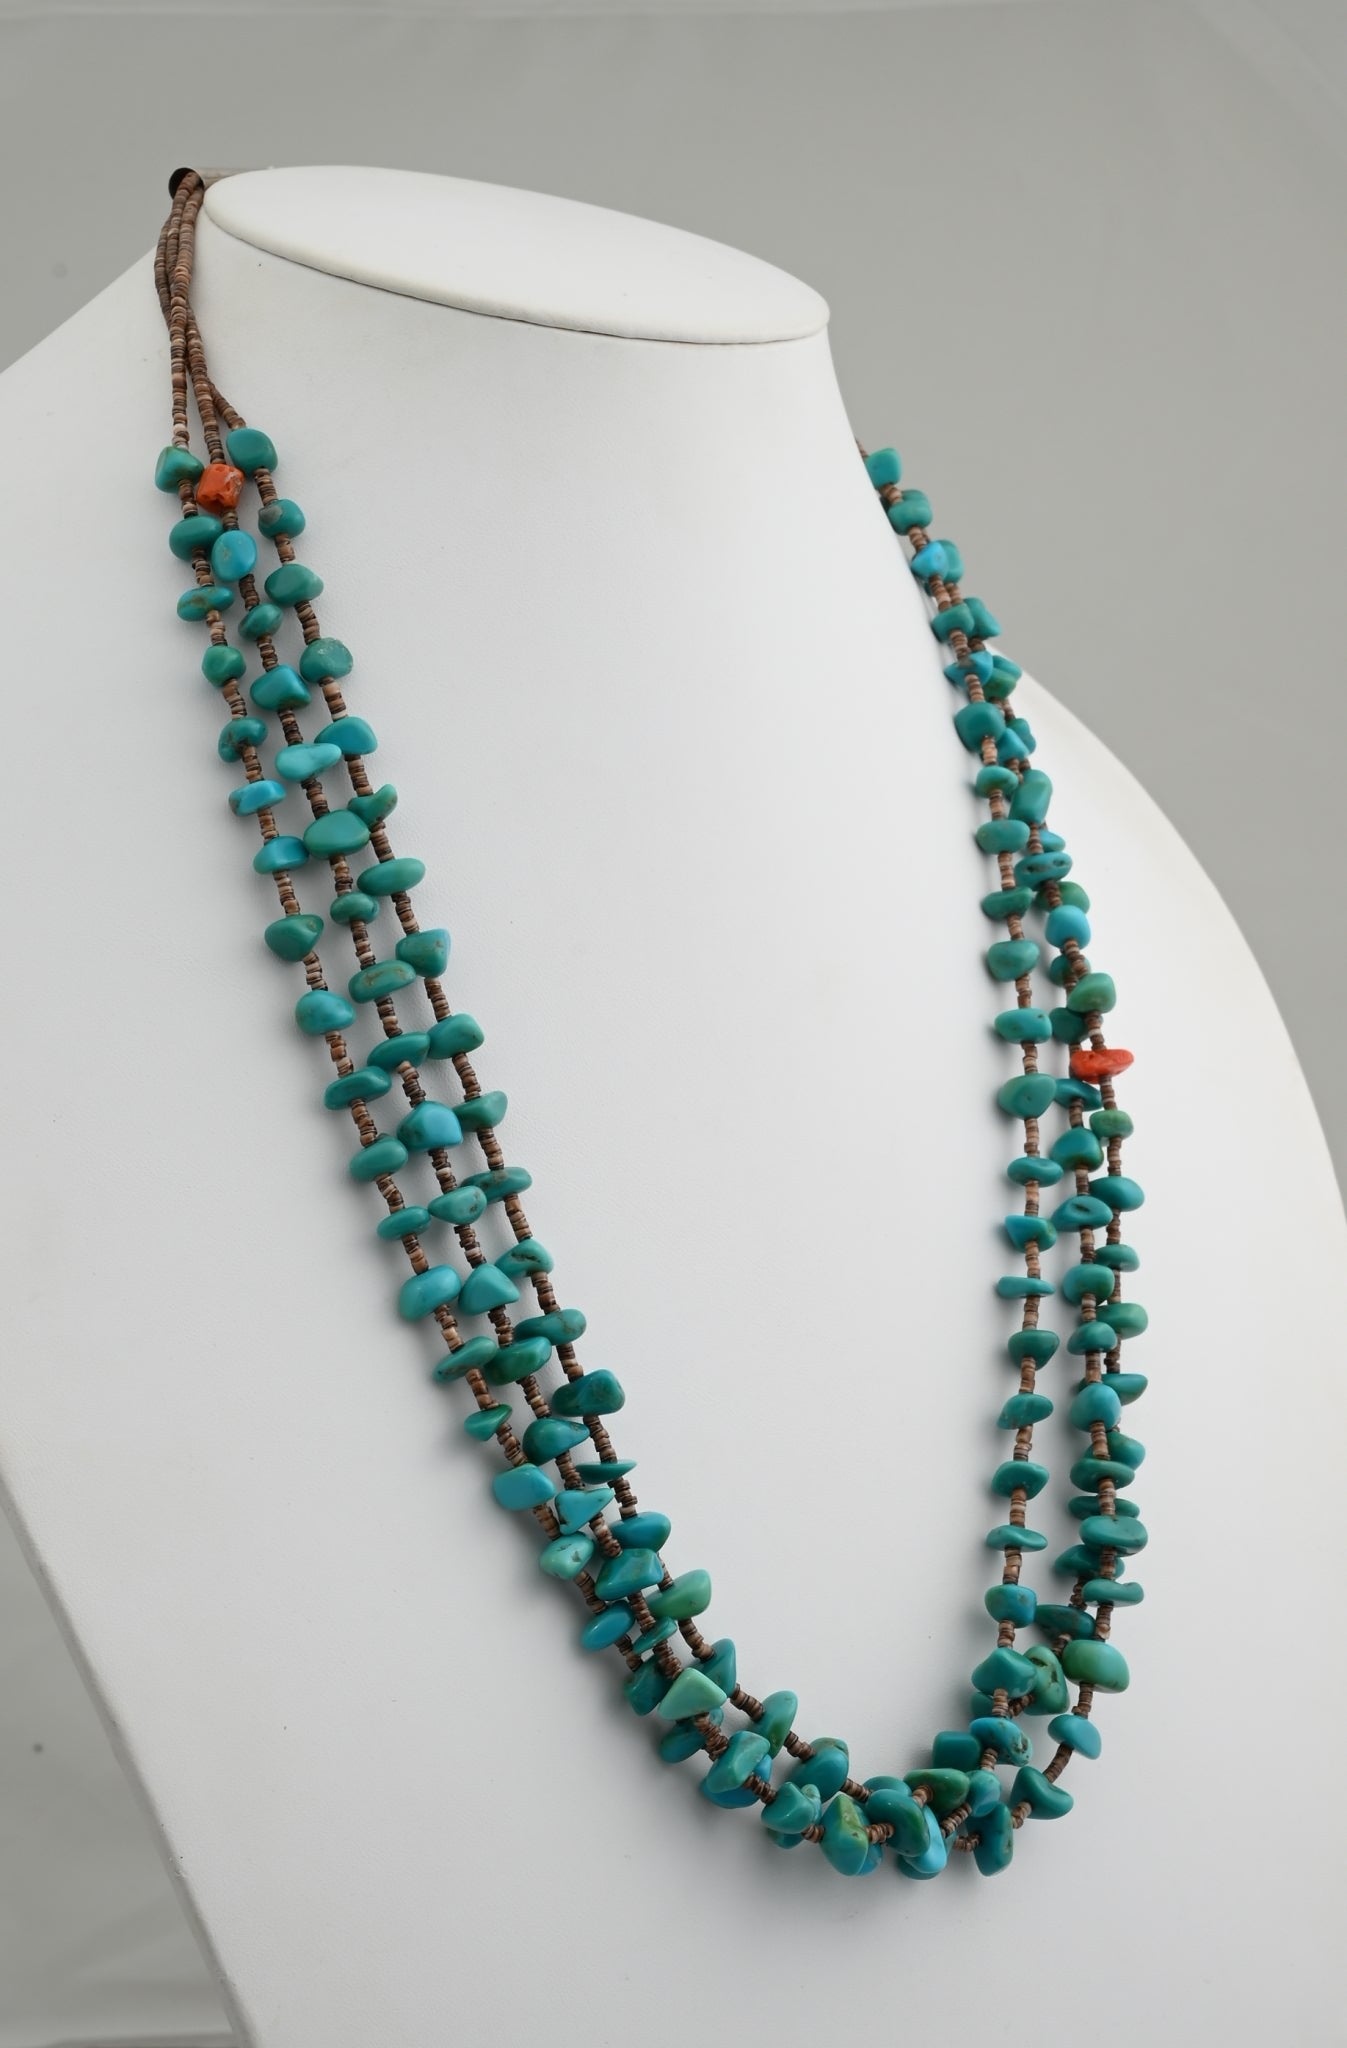 Necklace, Three-strand with Turquoise Nuggets; Vintage